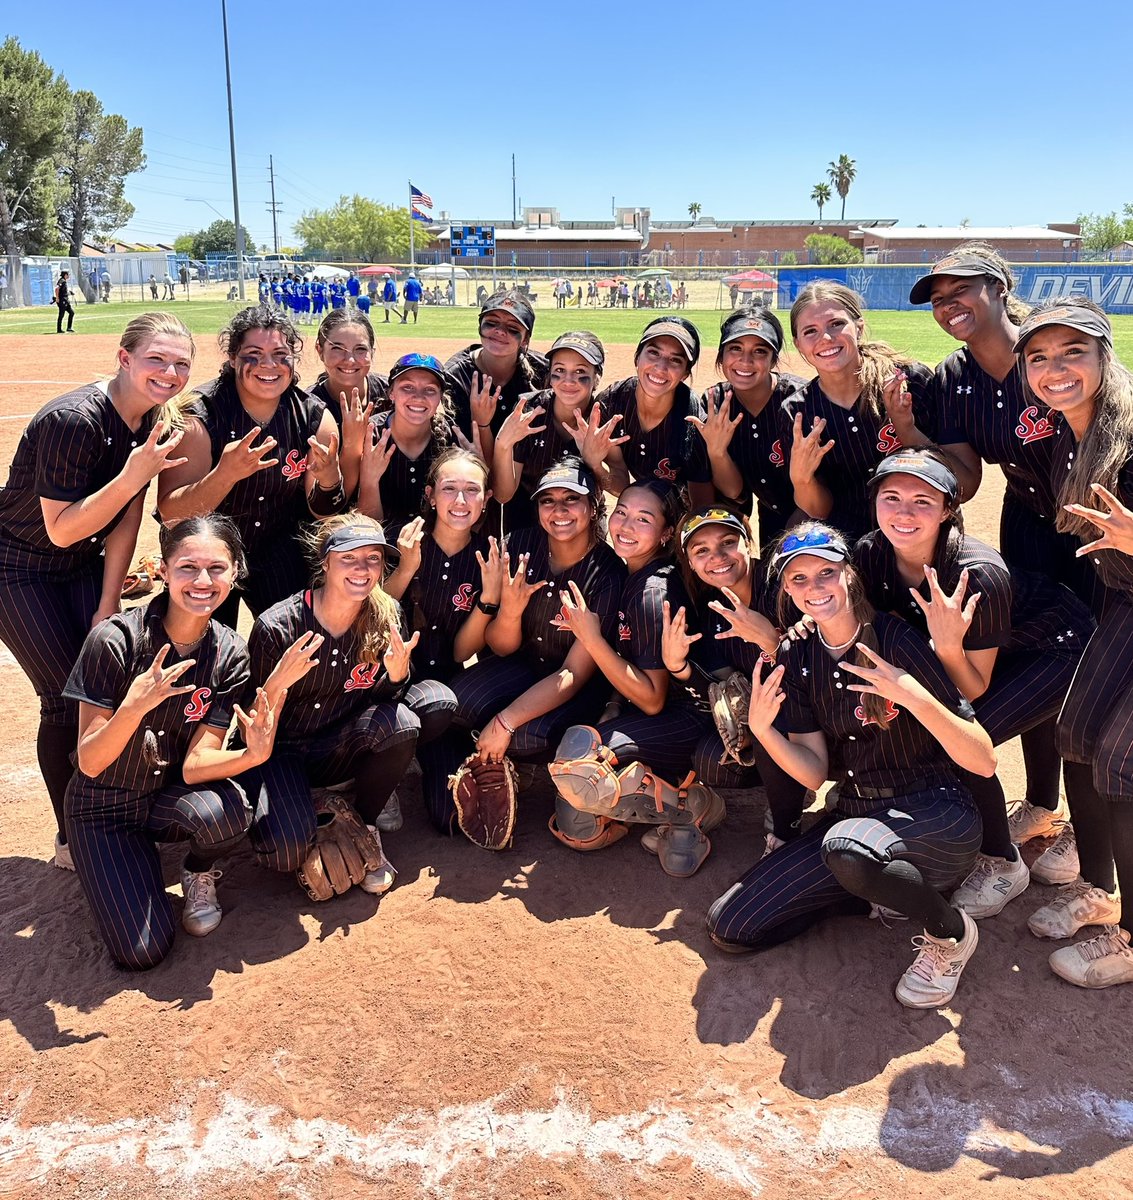 CORONA DUB! Corona goes down to Tucson and defeats the #3 Ranked Sunnyside Blue Devils, winning 7-2. Back at it on Wednesday for the second round of State Playoffs against Red Mountain. Game starts at 4:00pm. BE THERE, BE LOUD! 🥎🧡💛 #TakingCareOfBusiness #RoadToTheShip